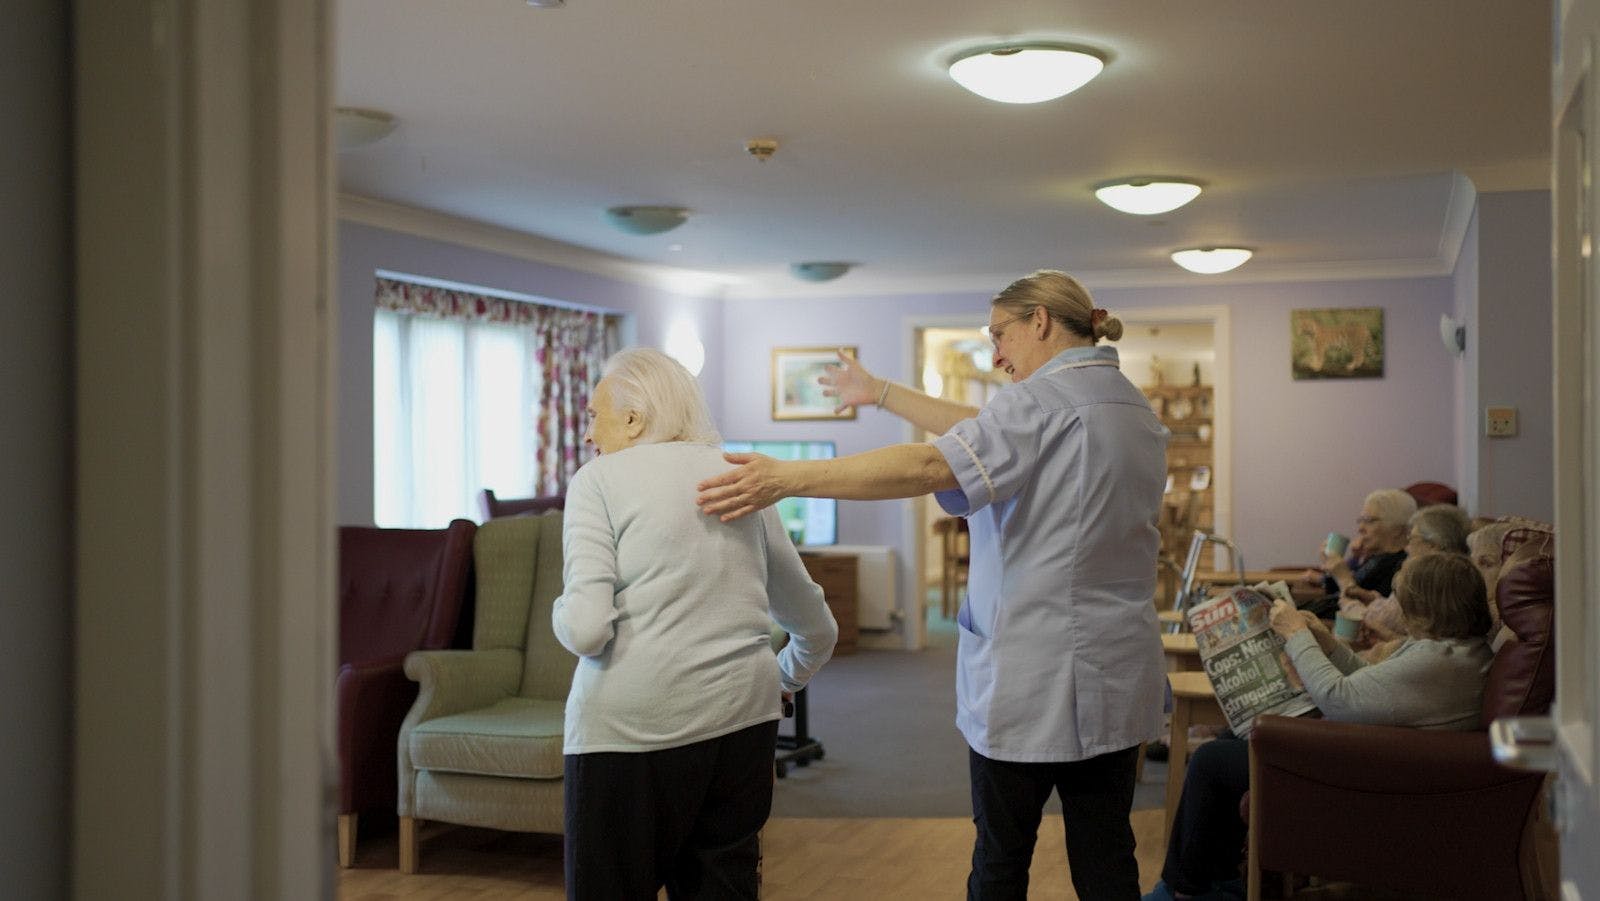 Shaw Healthcare - Deerswood Lodge care home 007